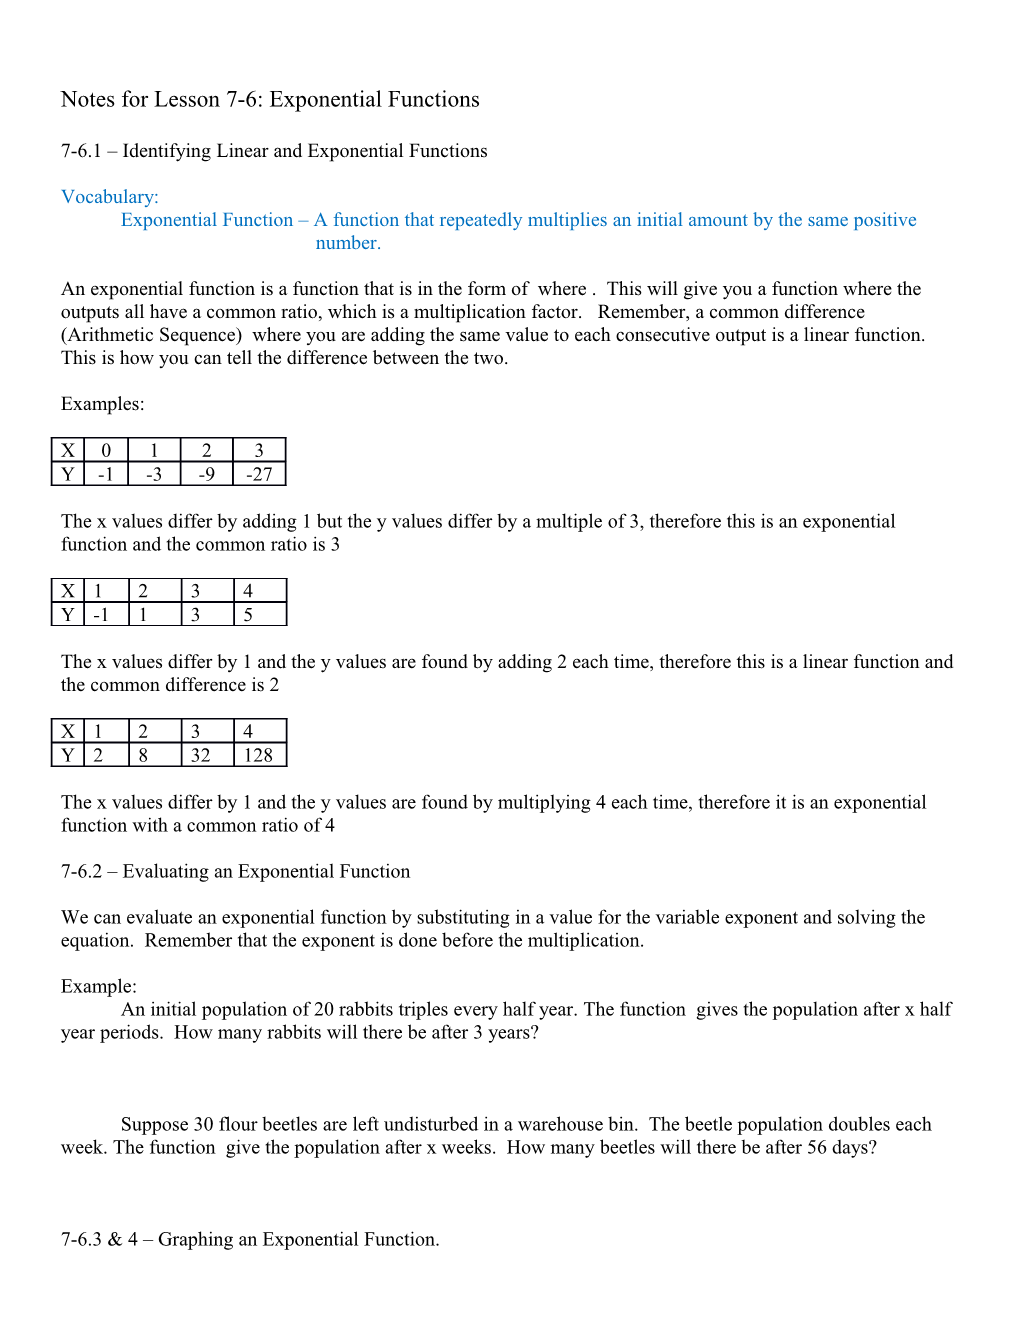 Notes for Lesson 7-6: Exponential Functions